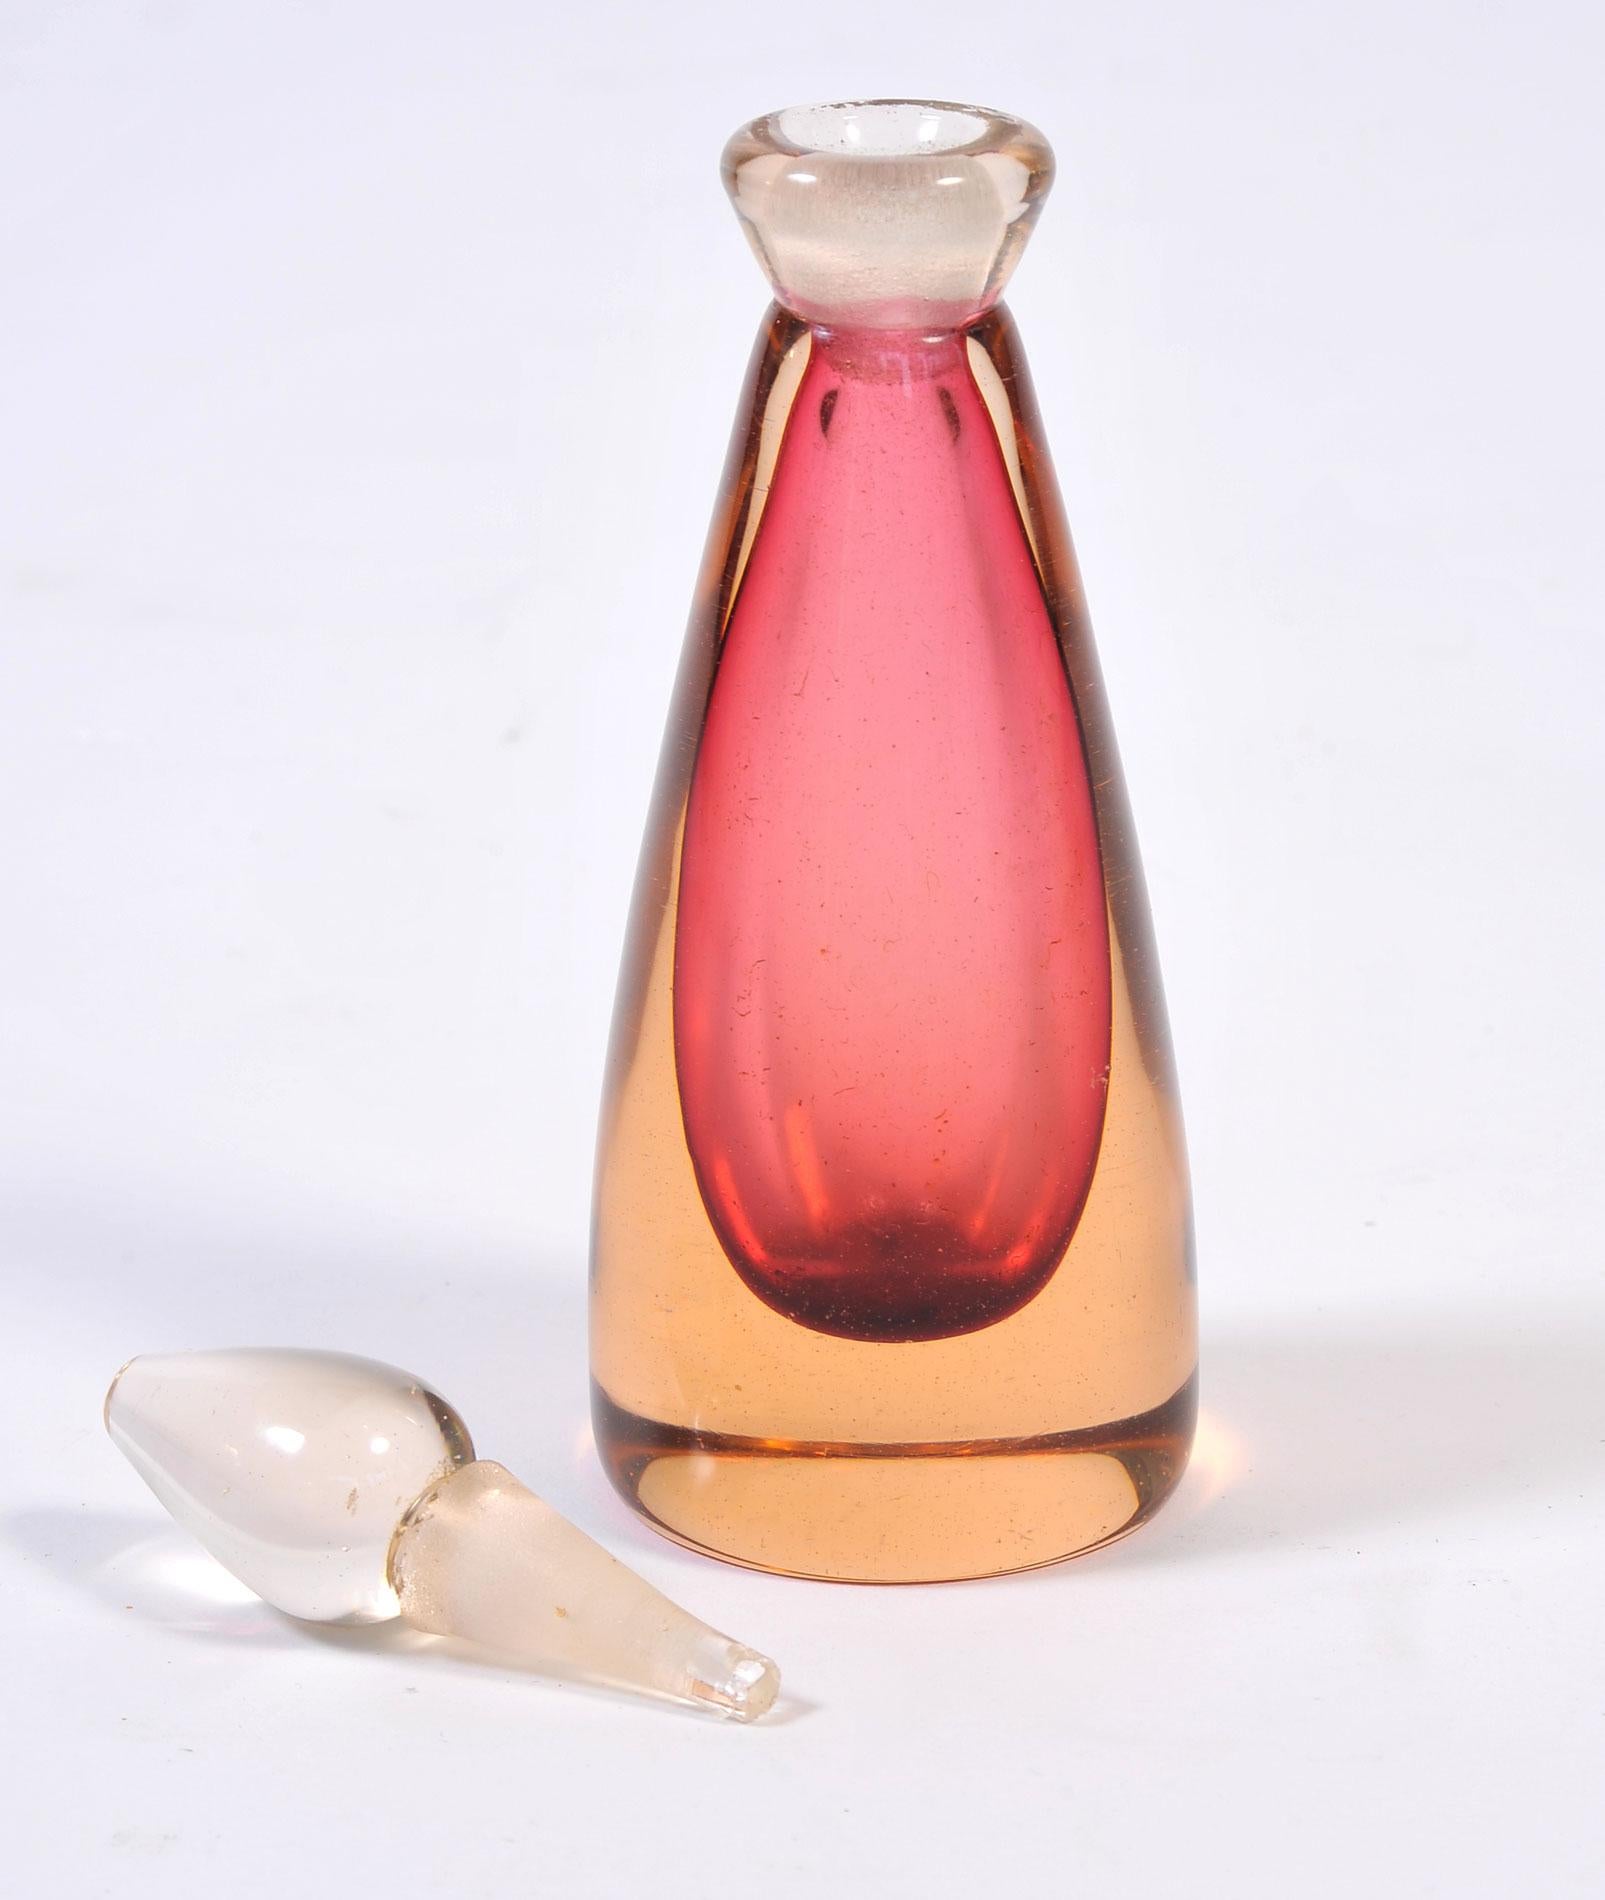 Romantic shaded rose pink and palest amber Murano glass perfume bottle by Seguso. Complimented with a tear drop stopper.